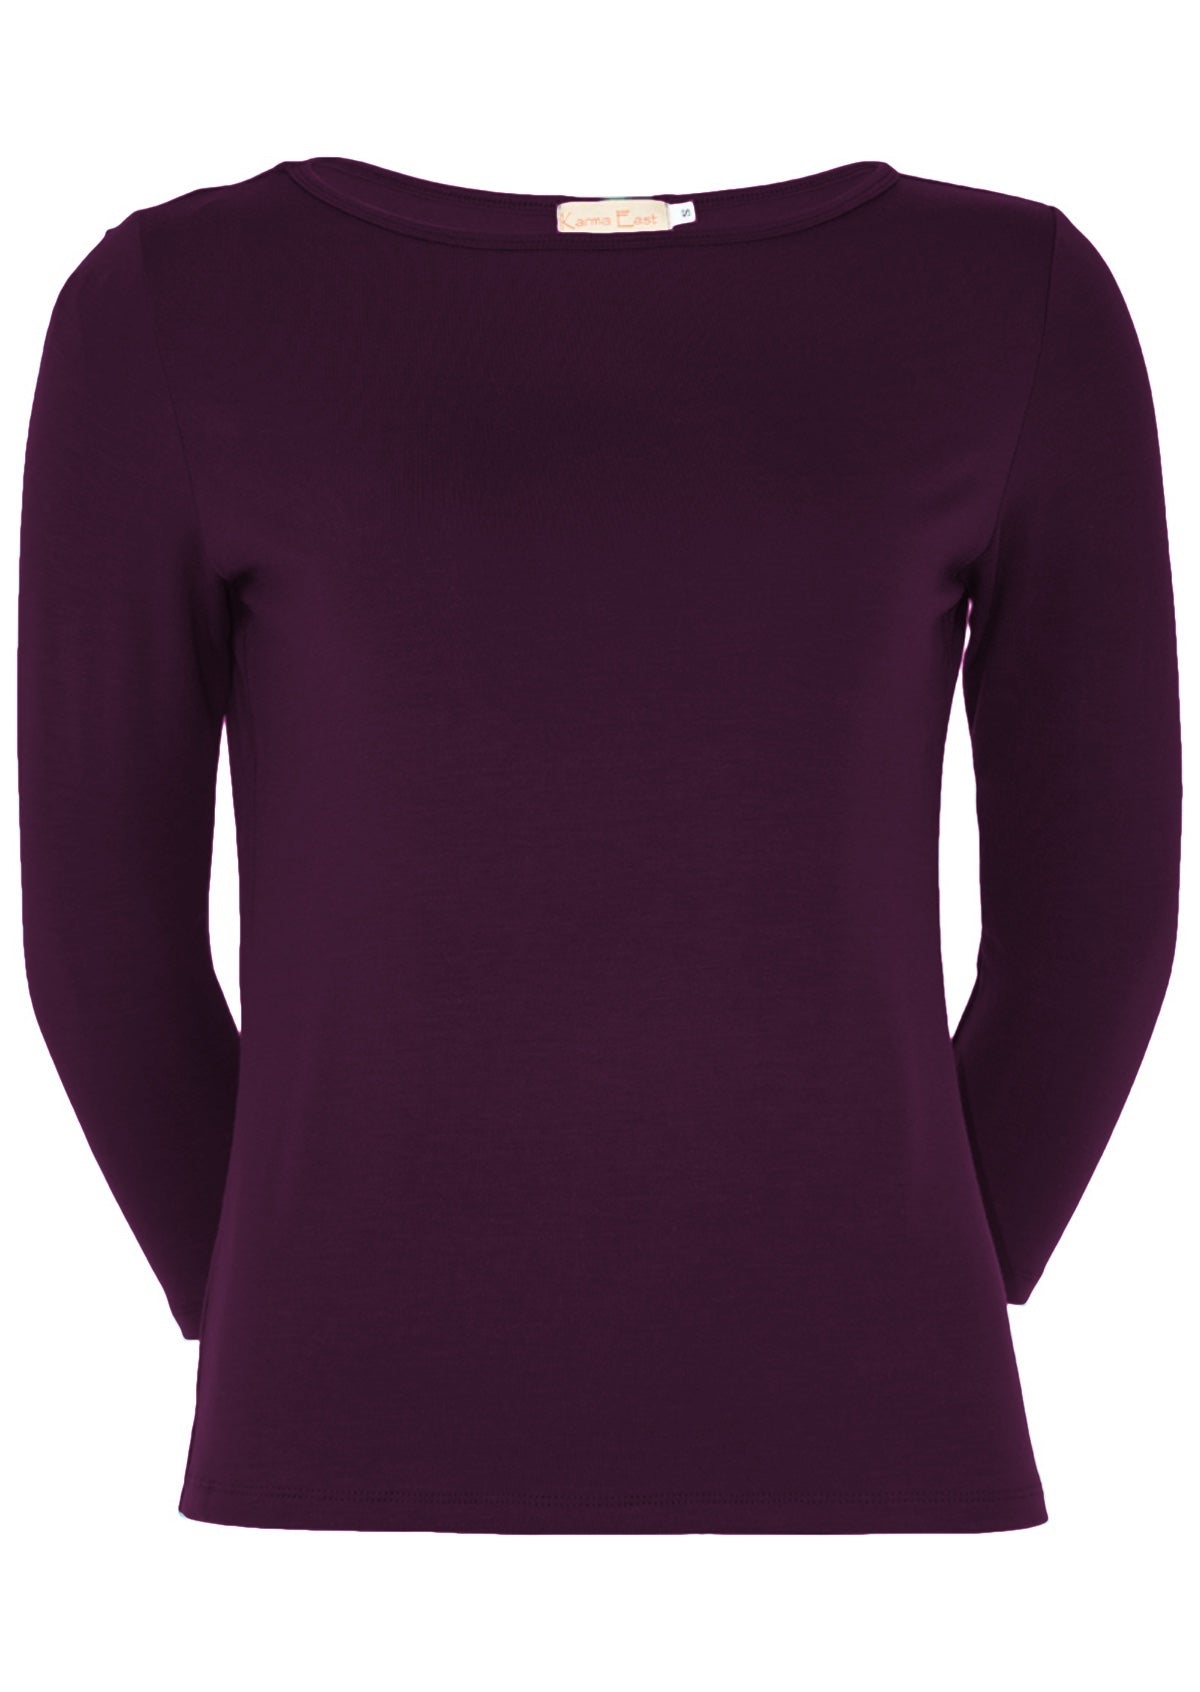 Front view of women's rayon boat neck purple 3/4 sleeve top.